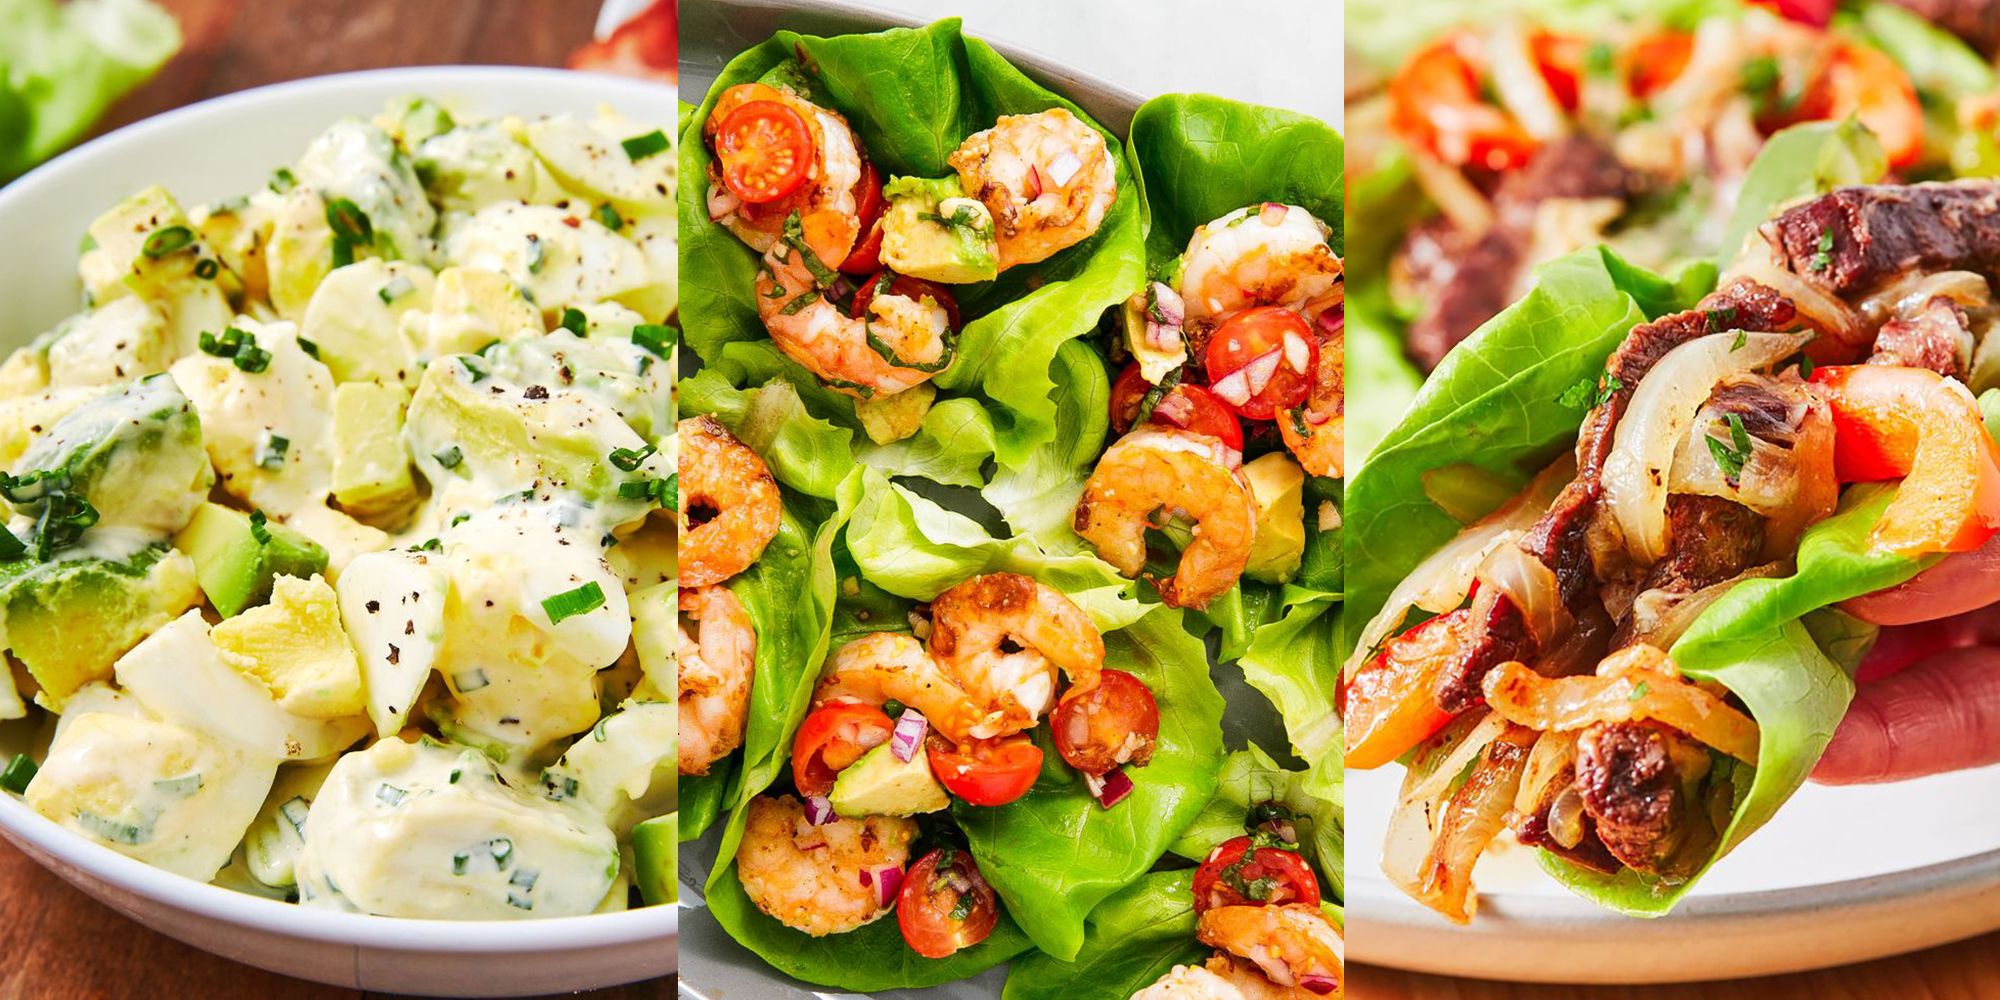 7 Low-Carb Lunch Ideas That Are Actually Tasty